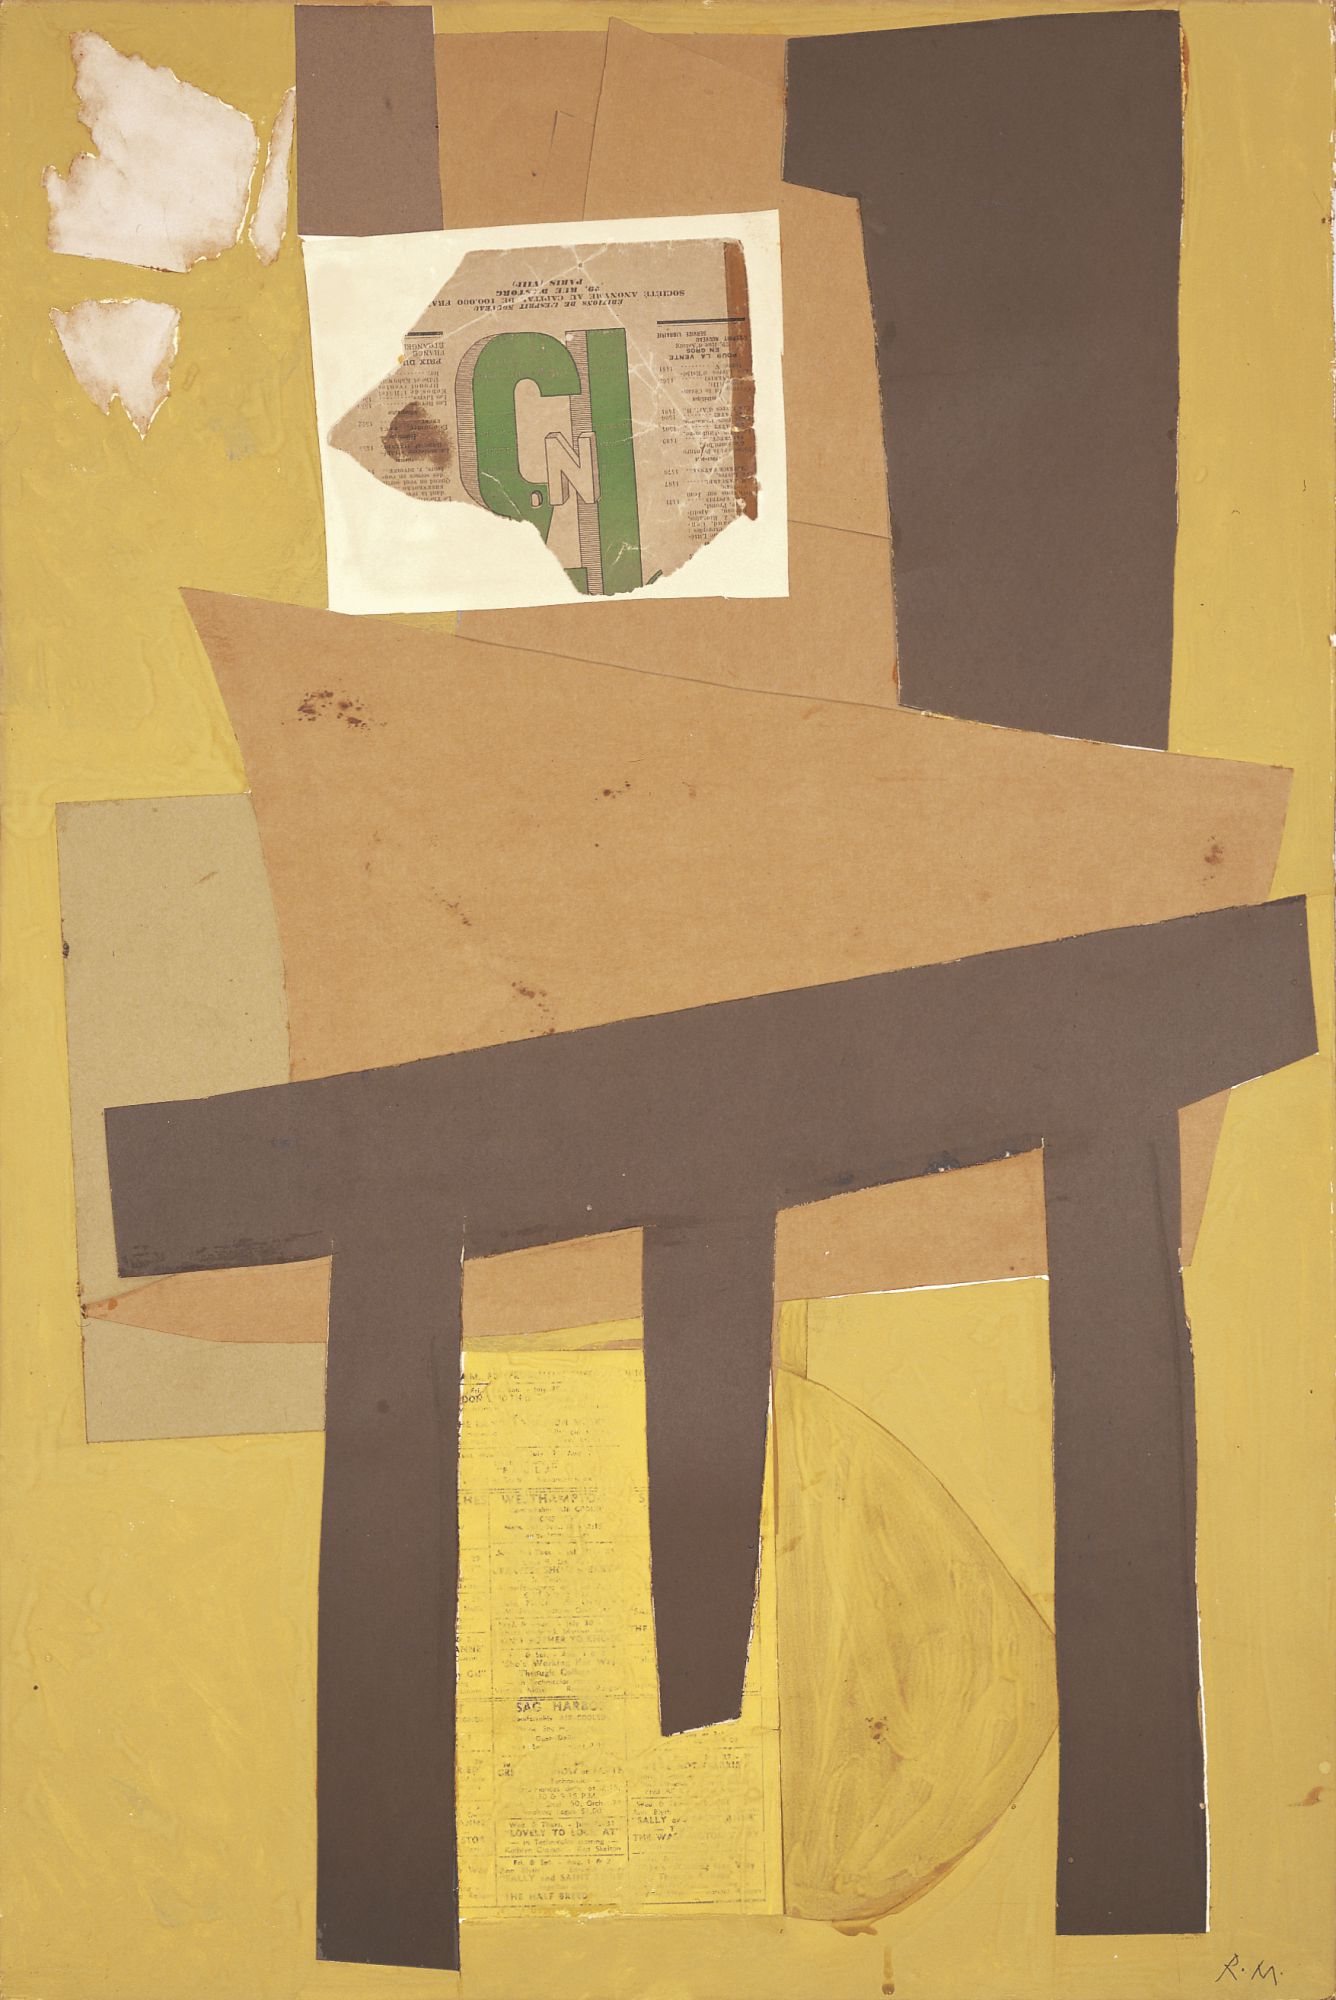 The Easel I, 1952. Casein and pasted papers on board, 29 7/8 x 20 1/8 inches (75.9 x 51.1 cm)